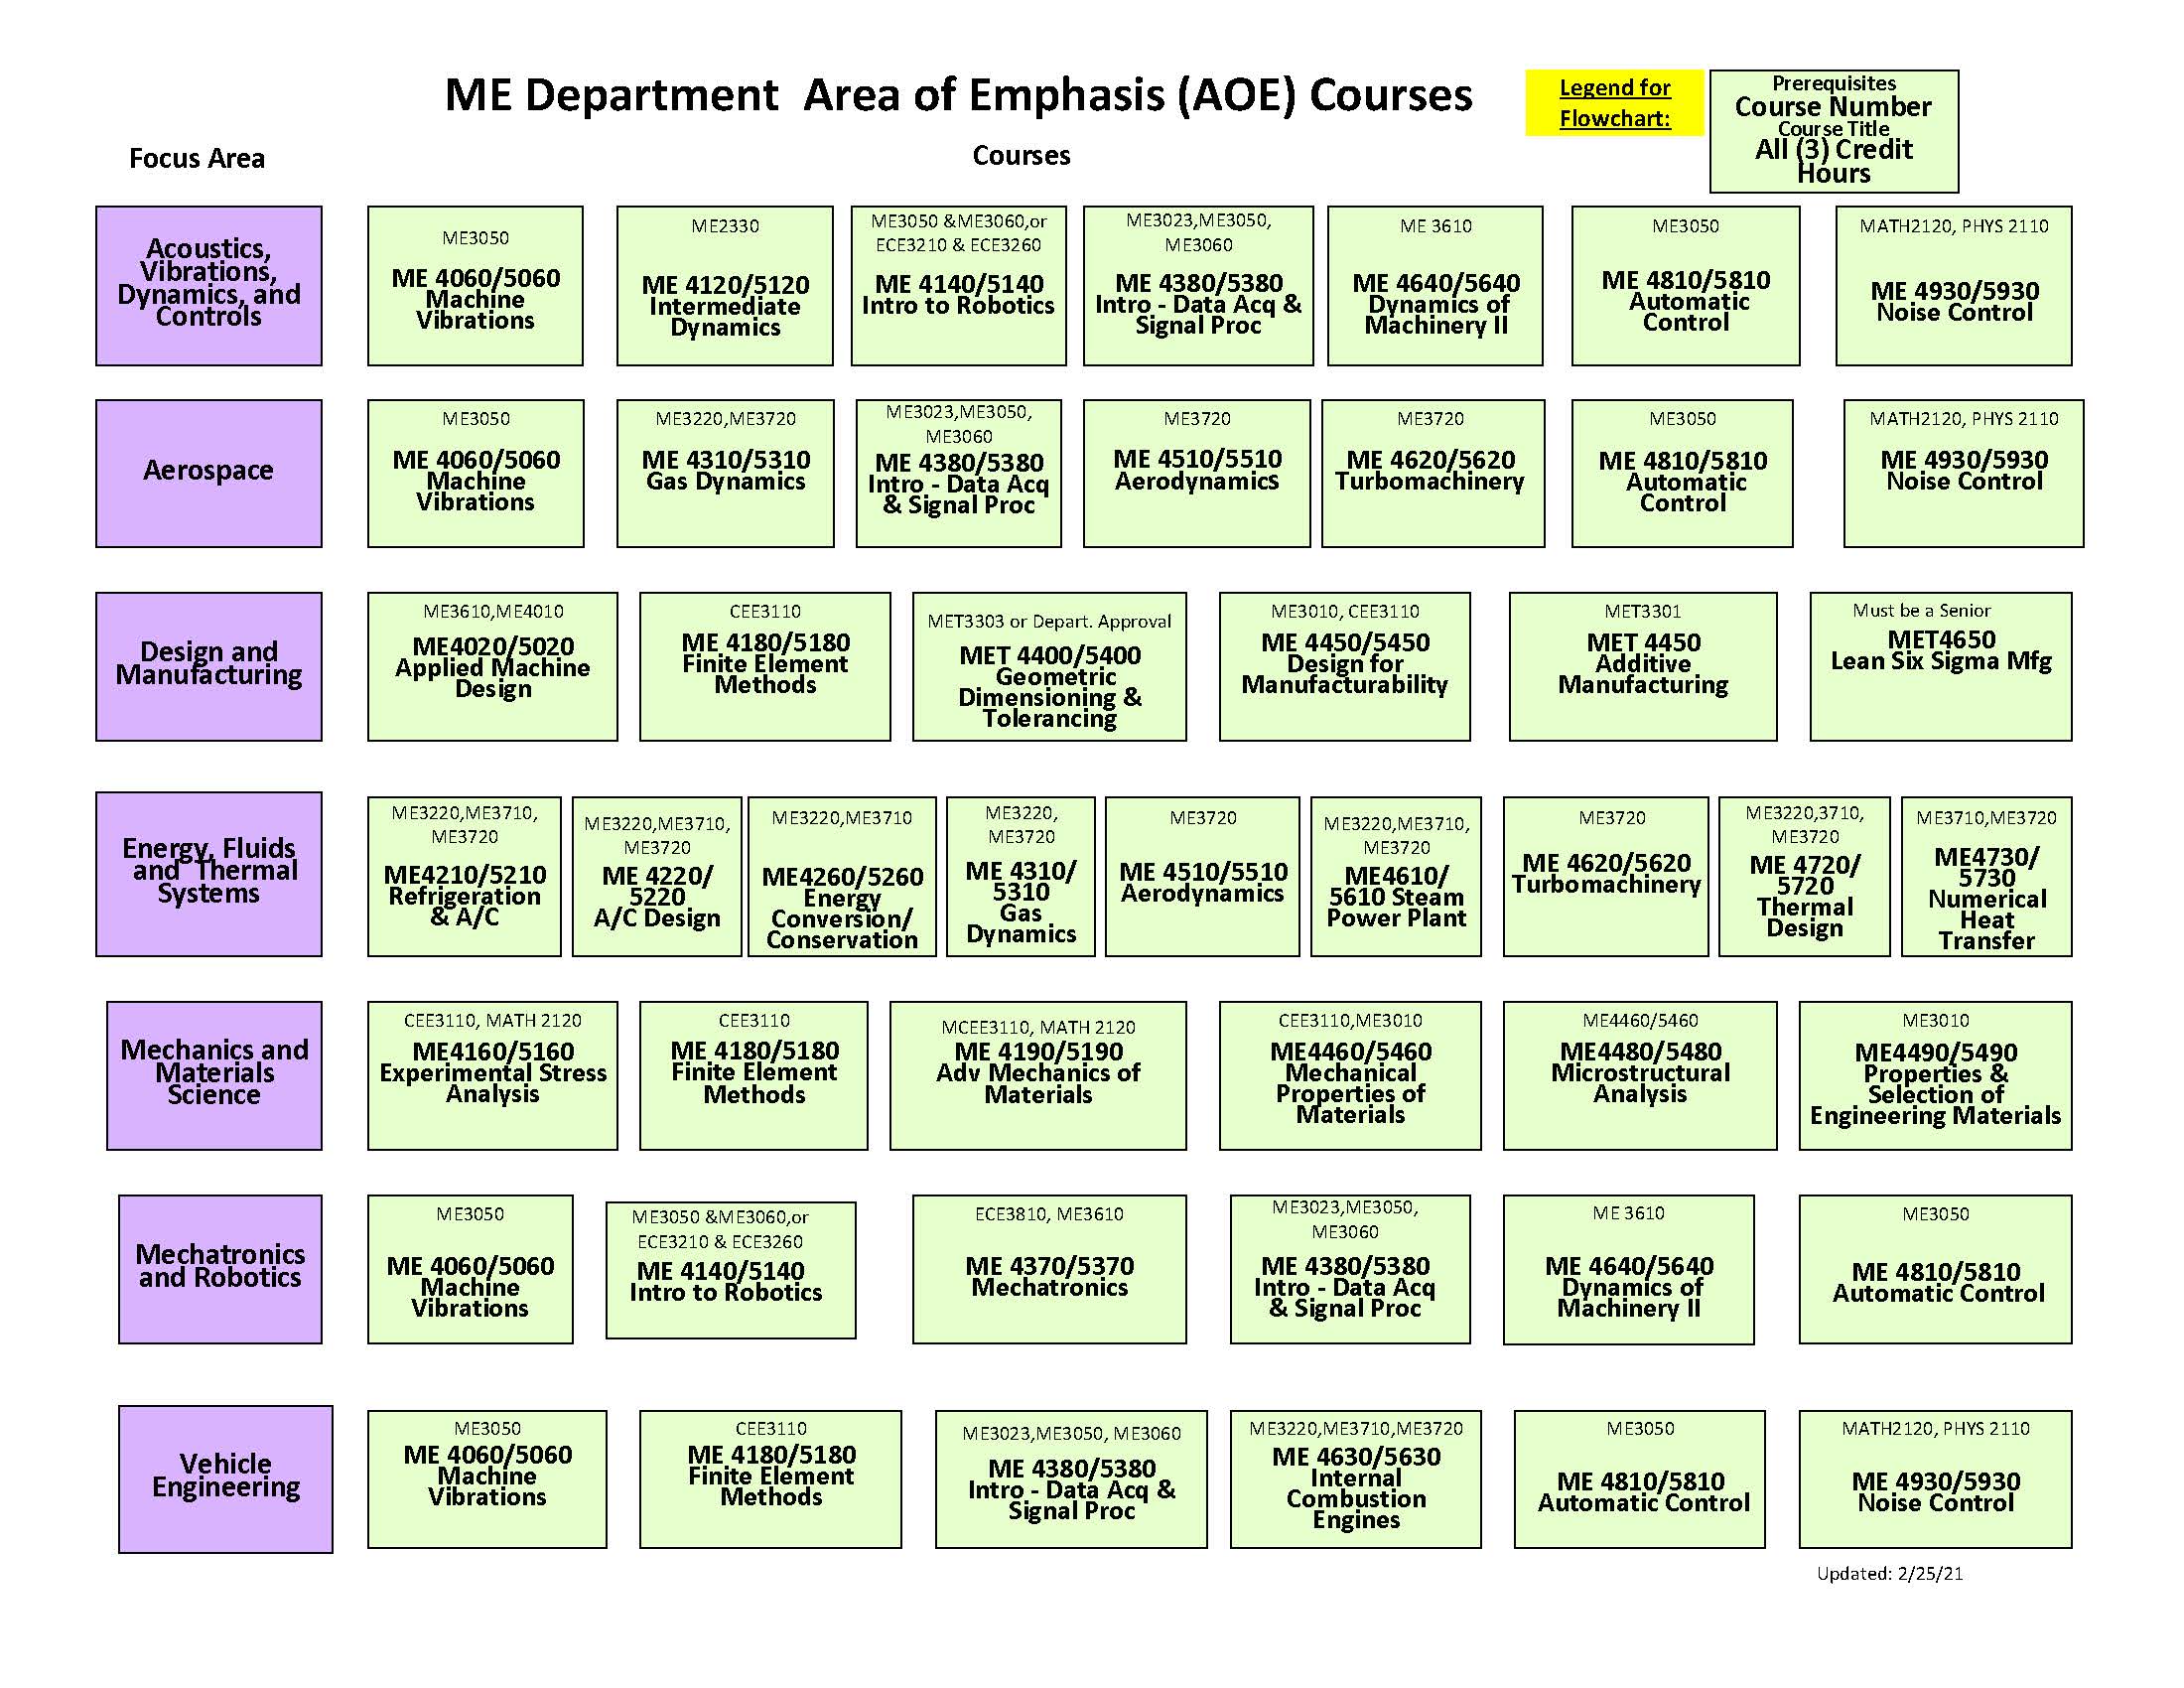 Area of Emphasis Courses